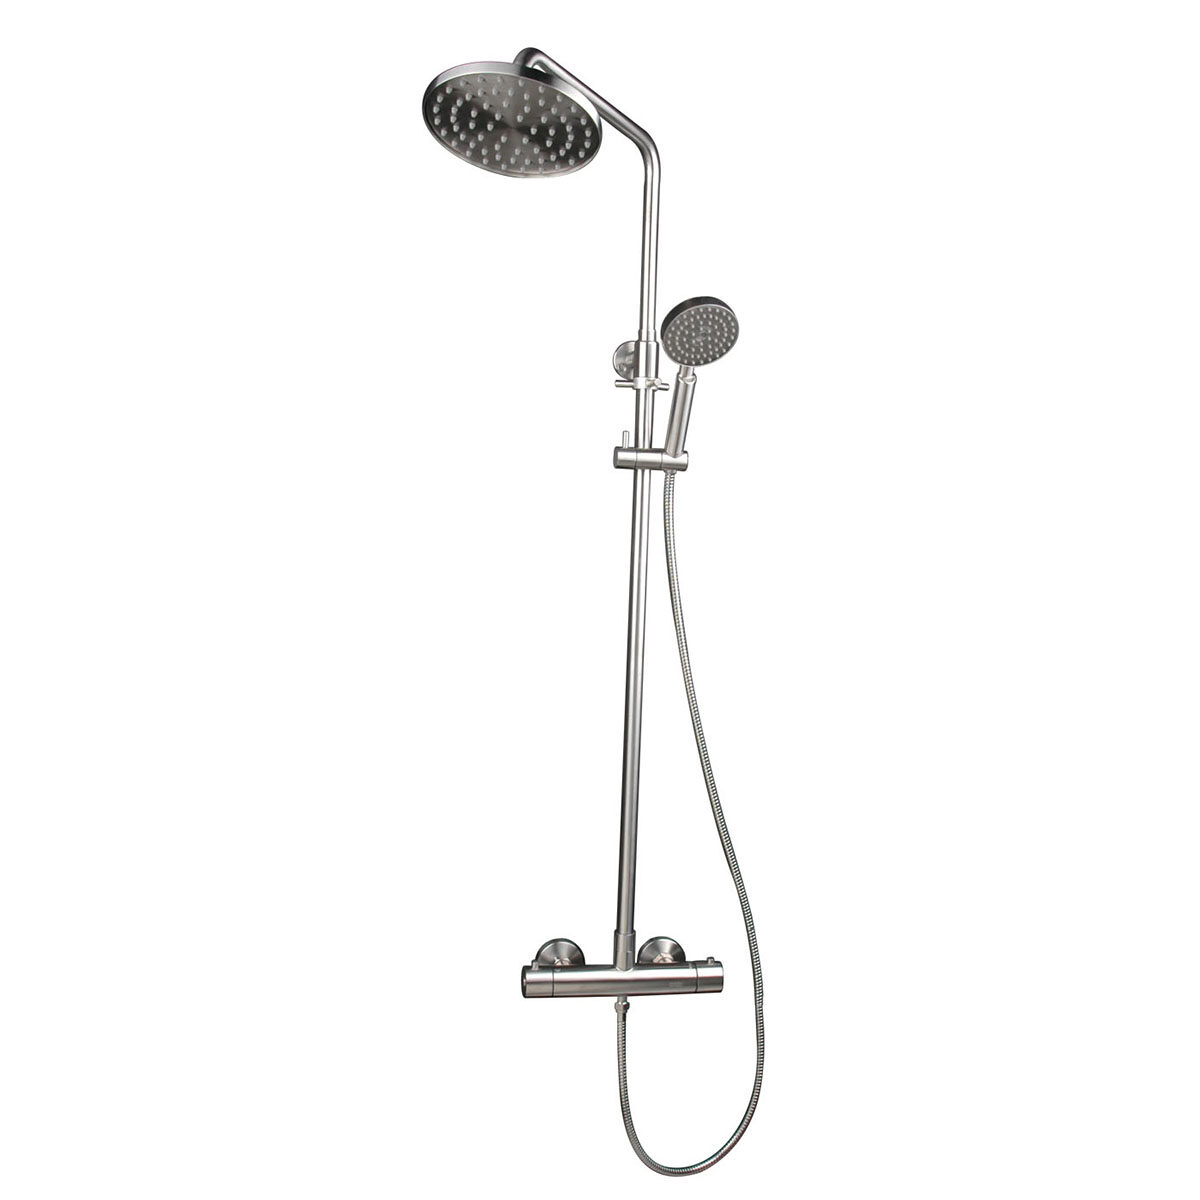 Wholesale Price For Modern Design Stainless Steel Shower Bathtub Thermostatic Faucet Set